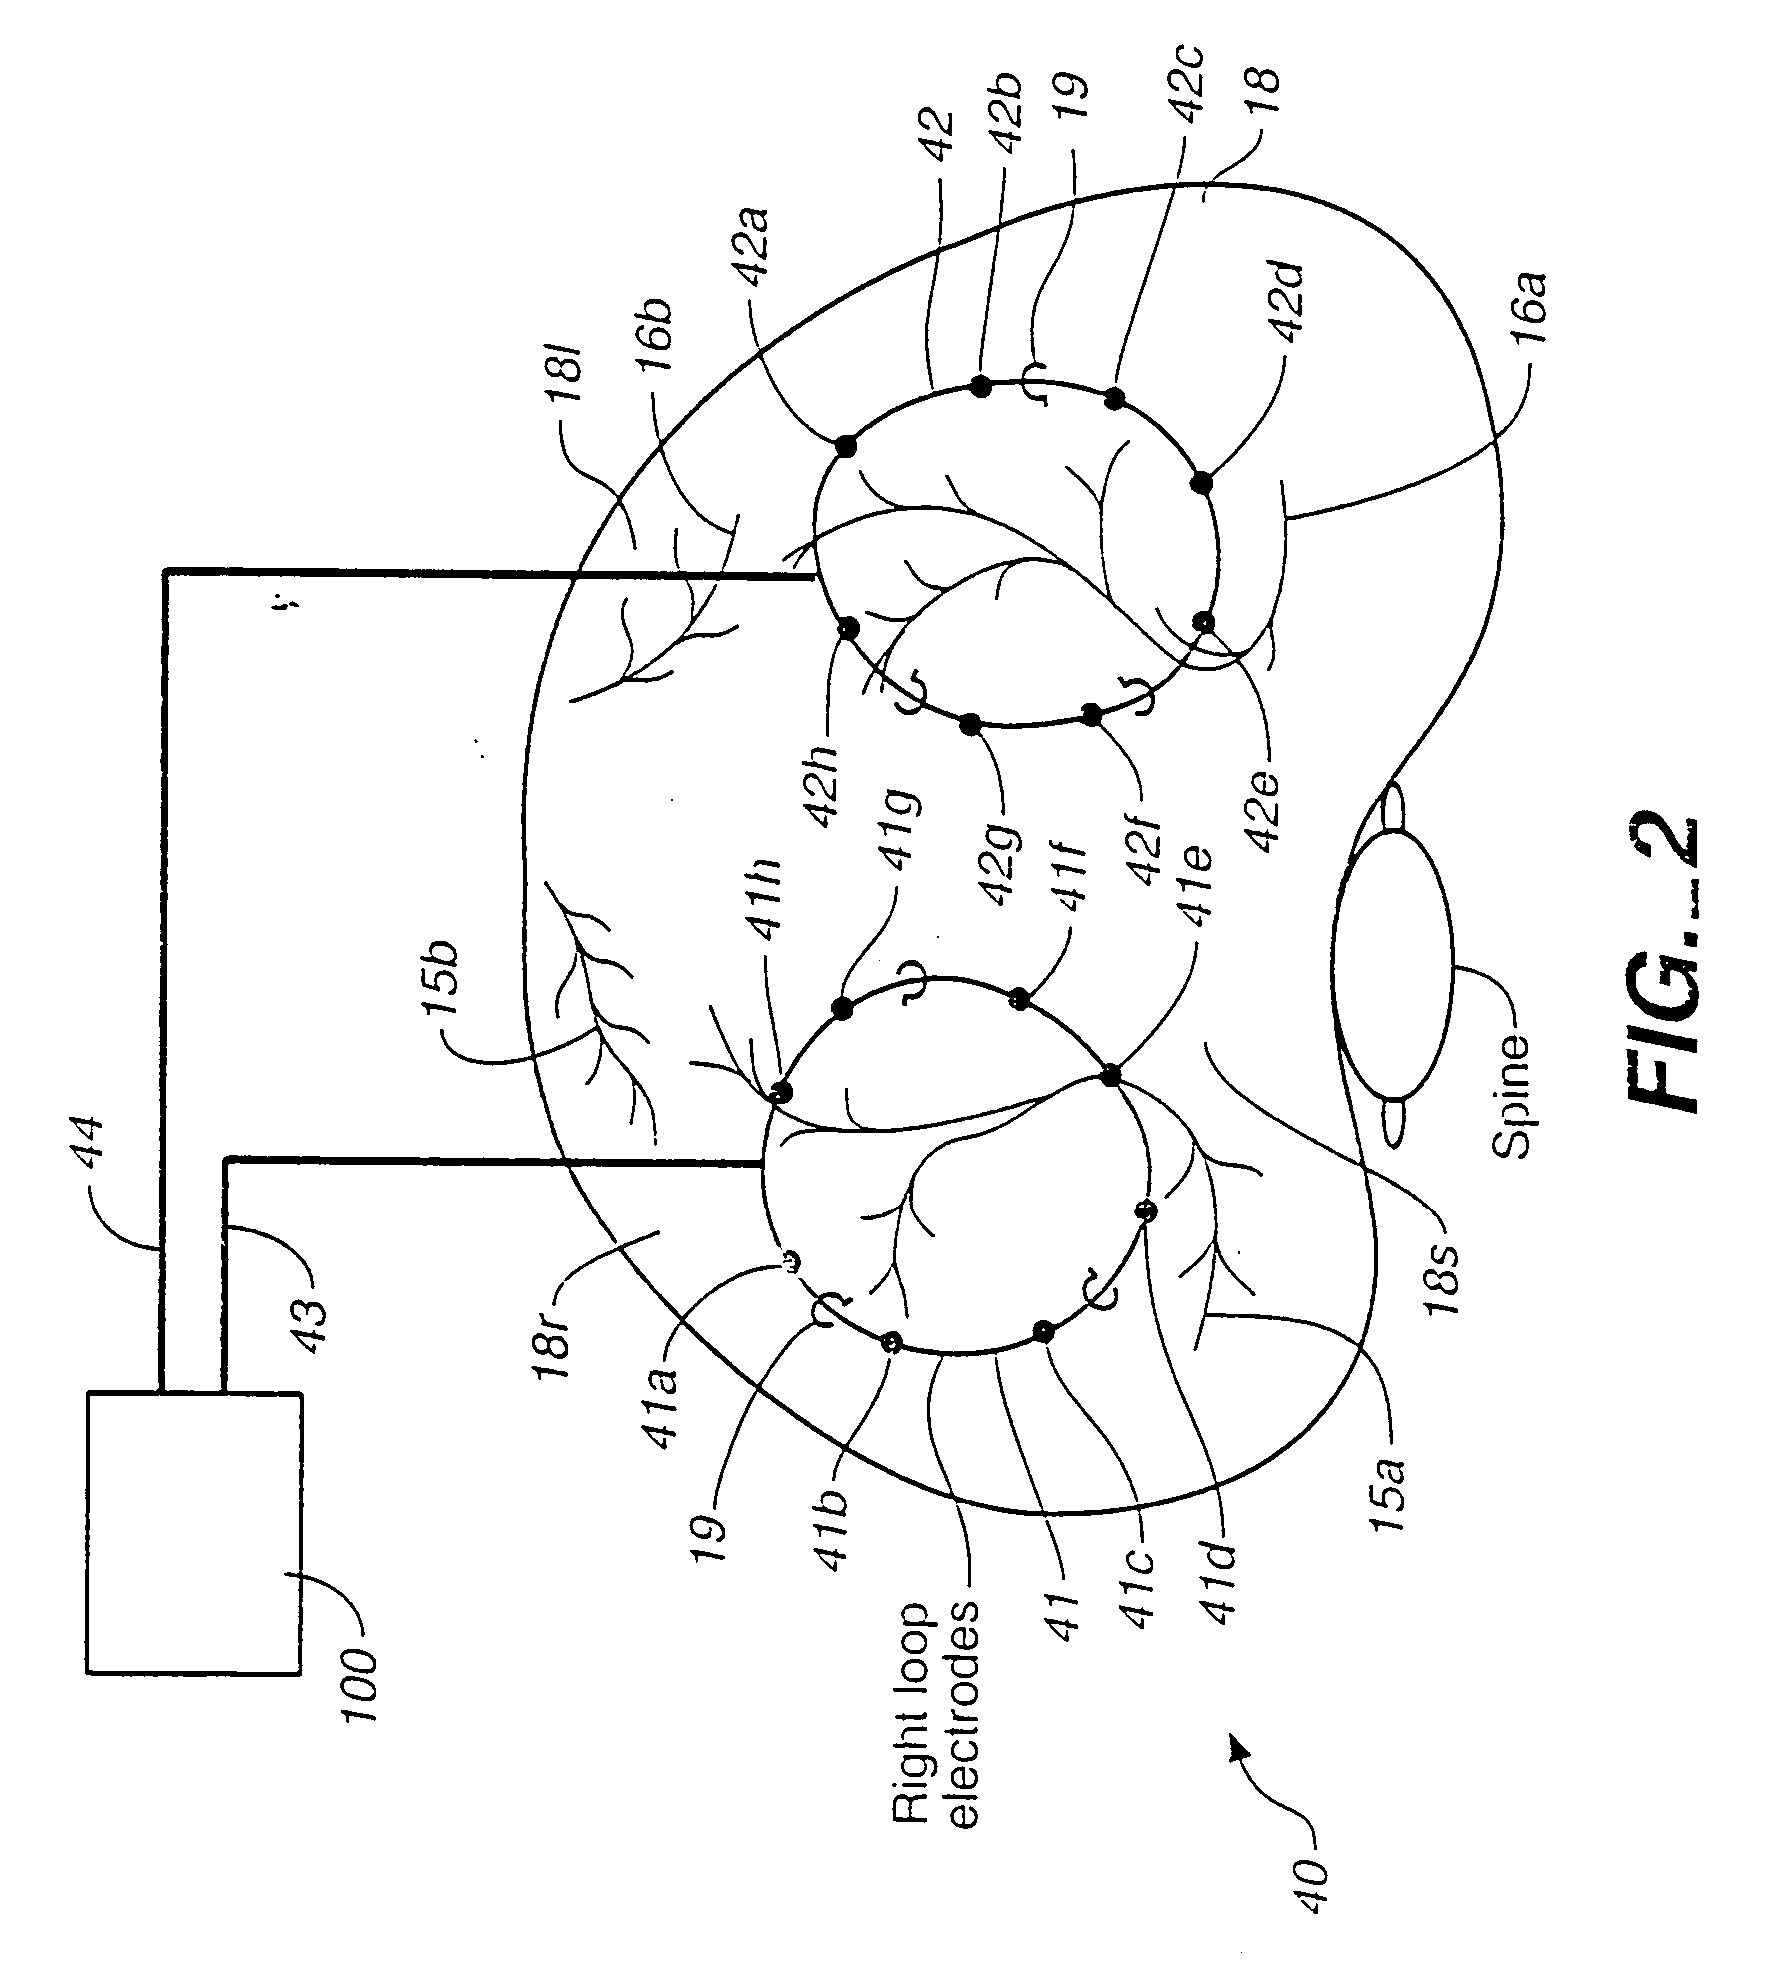 Patient compliance management device and method